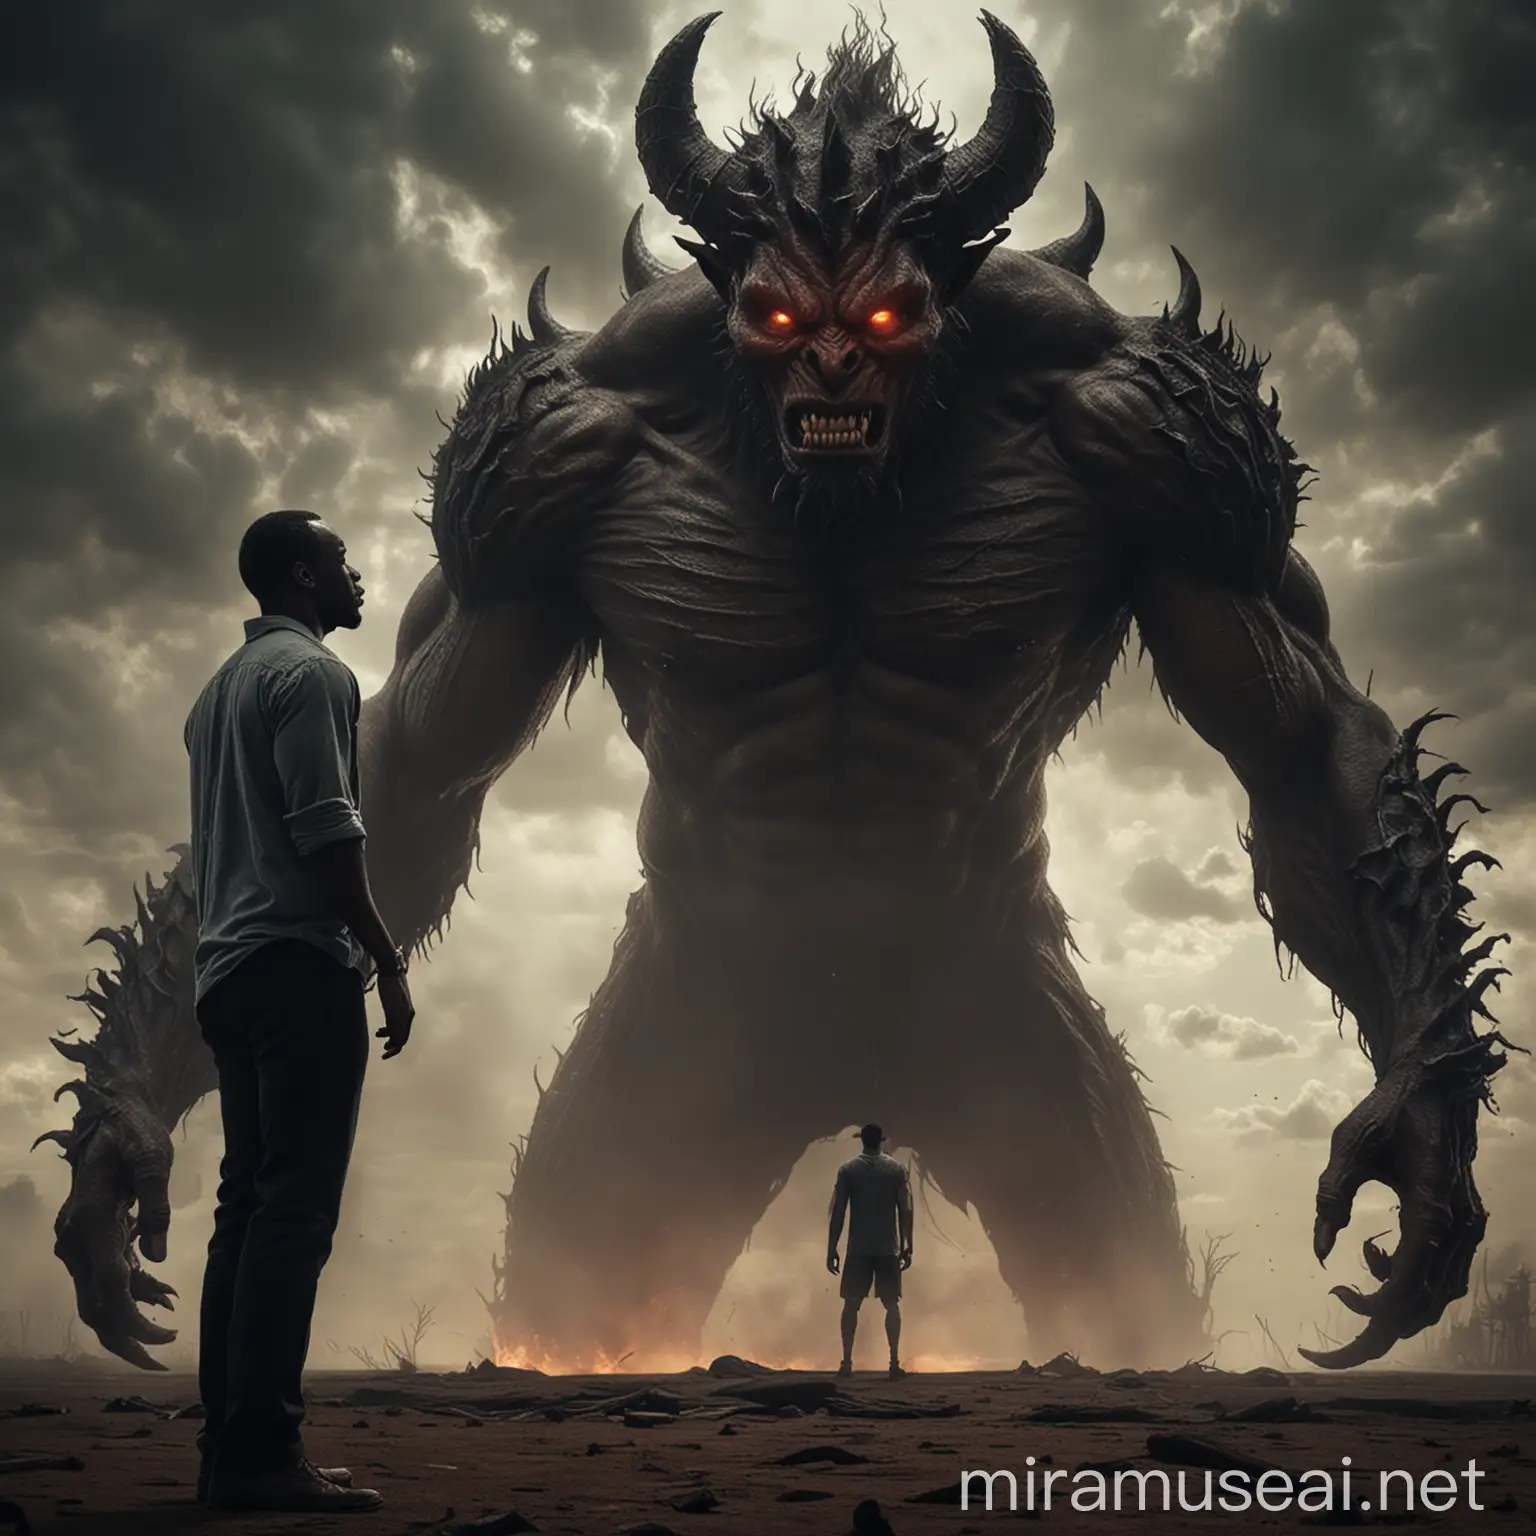 African American Man Confronting Giant Demon in Epic Battle